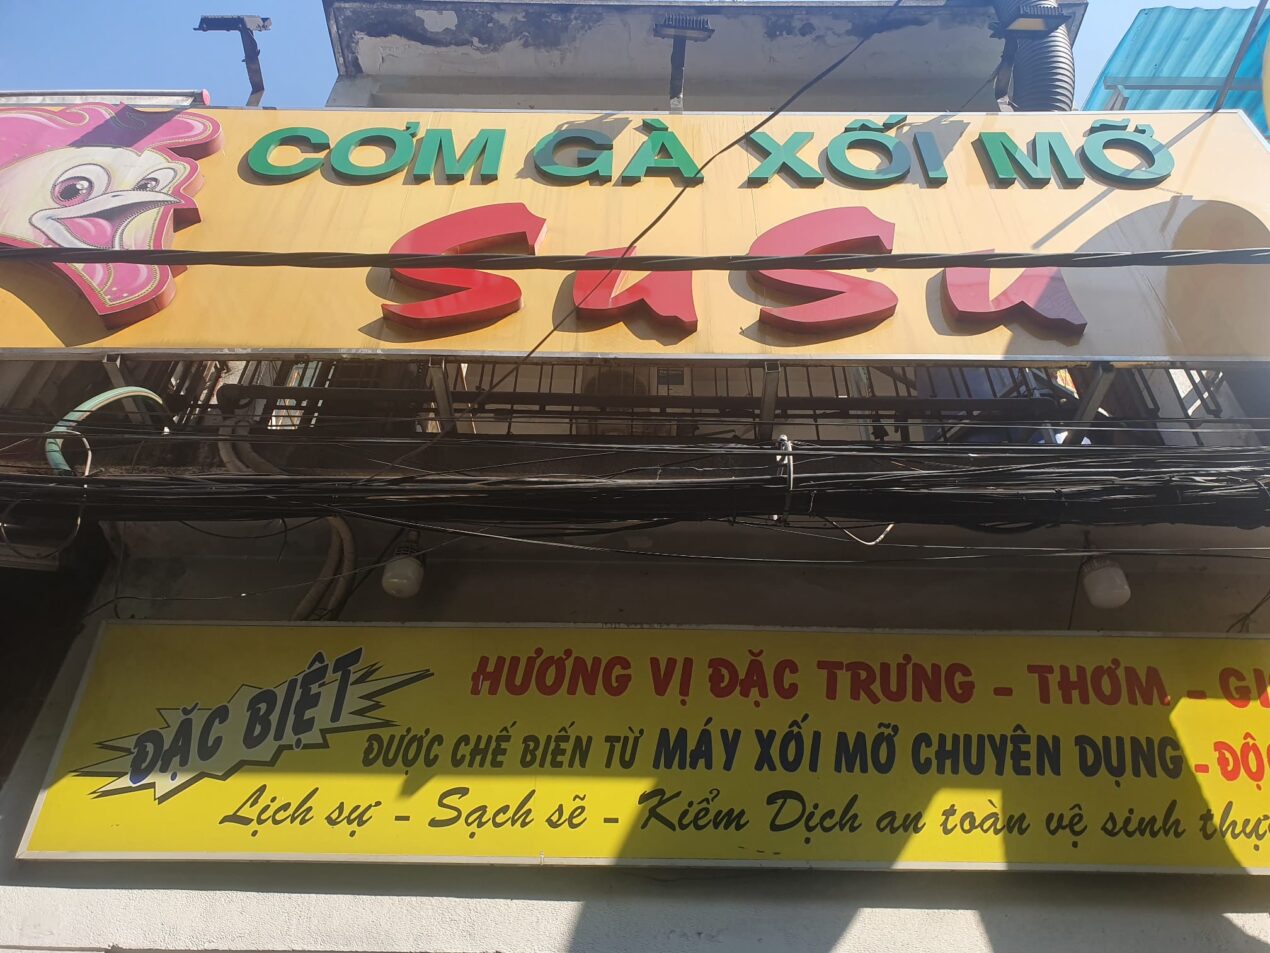 Cơm Gà Xối Mỡ Su Su yellow sign with green and red lettering